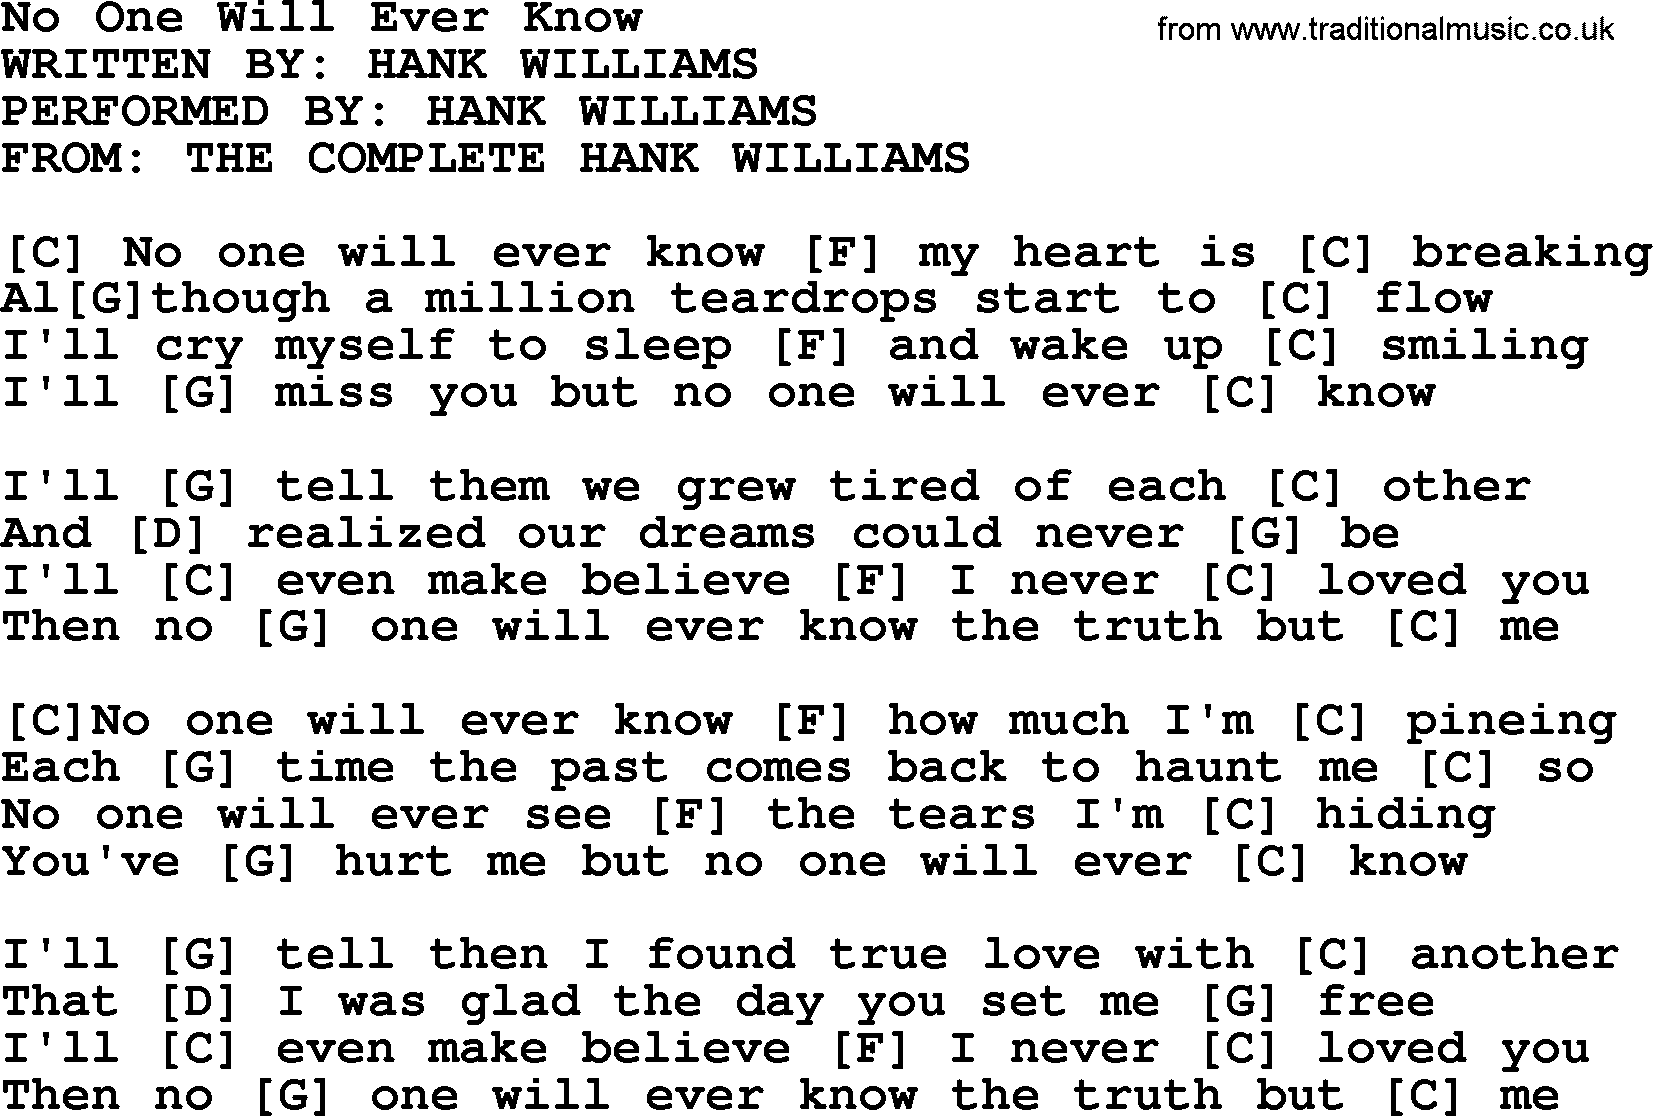 Hank Williams song No One Will Ever Know, lyrics and chords